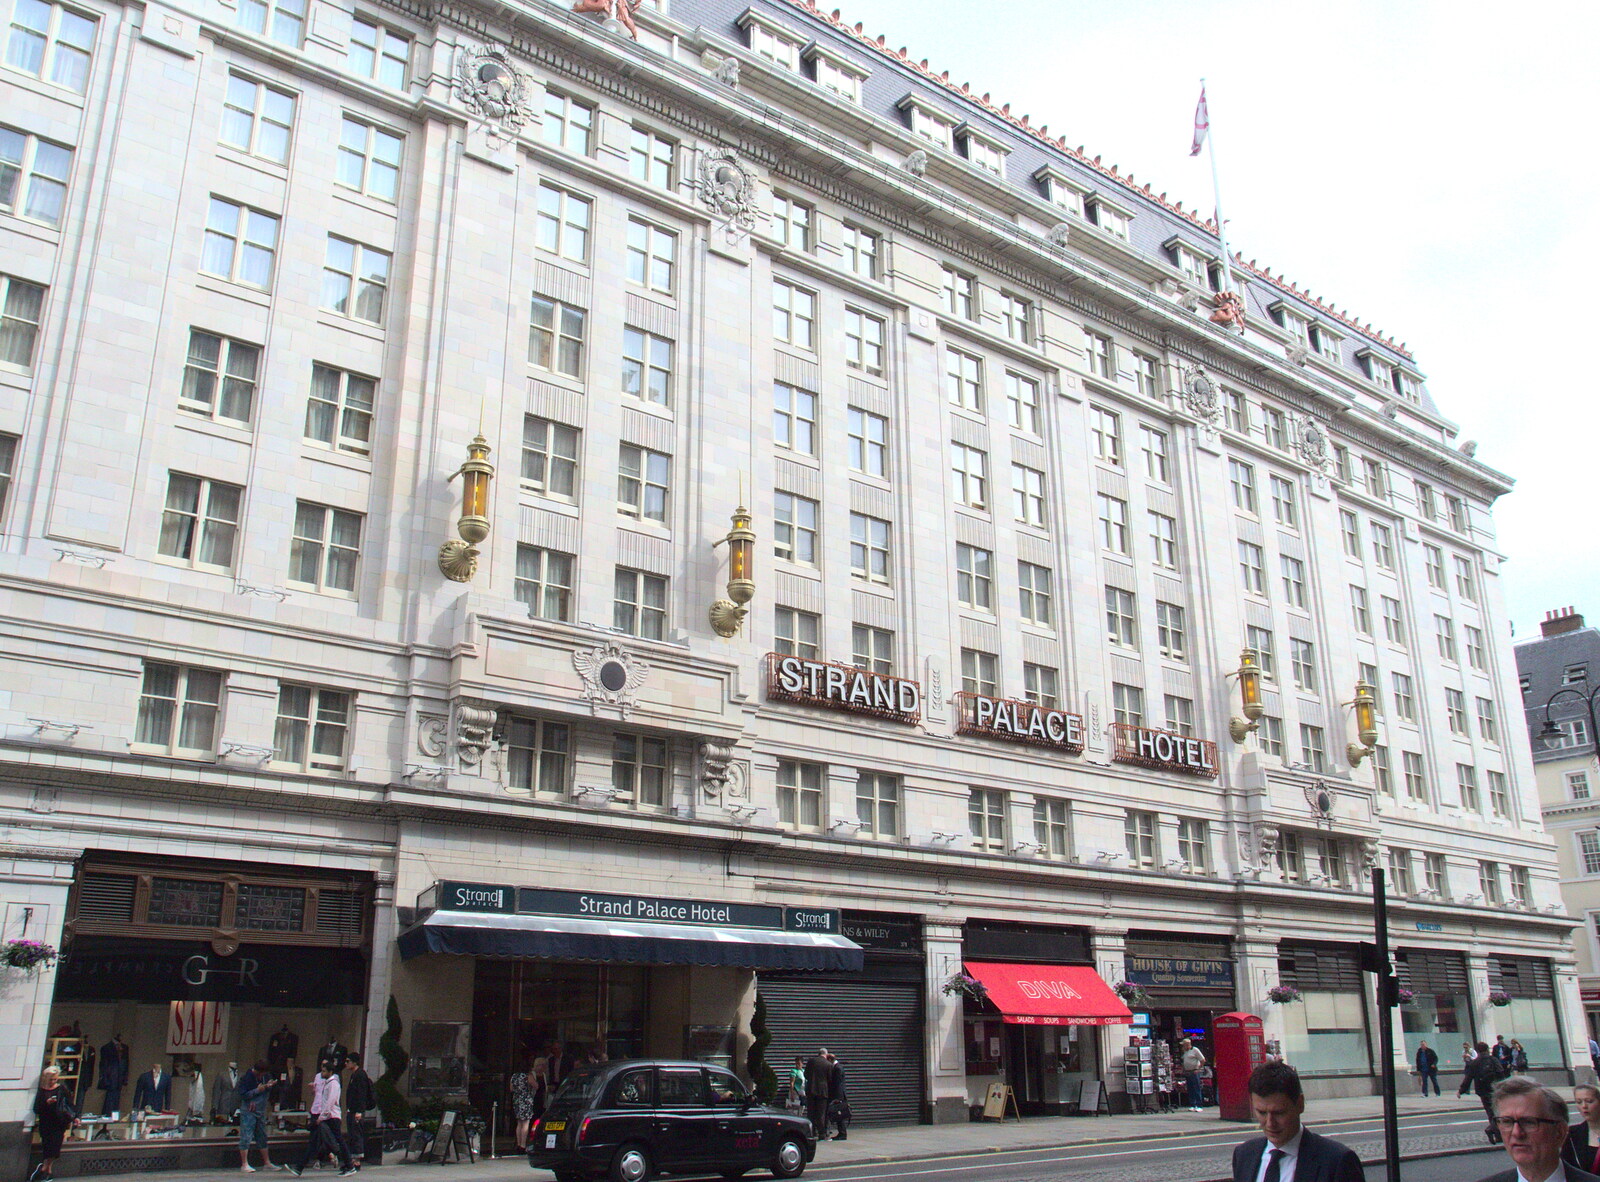 We pass the Strand Palace Hotel going to Maplin from SwiftKey Innovation Days, The Haymarket, London - 27th June 2014